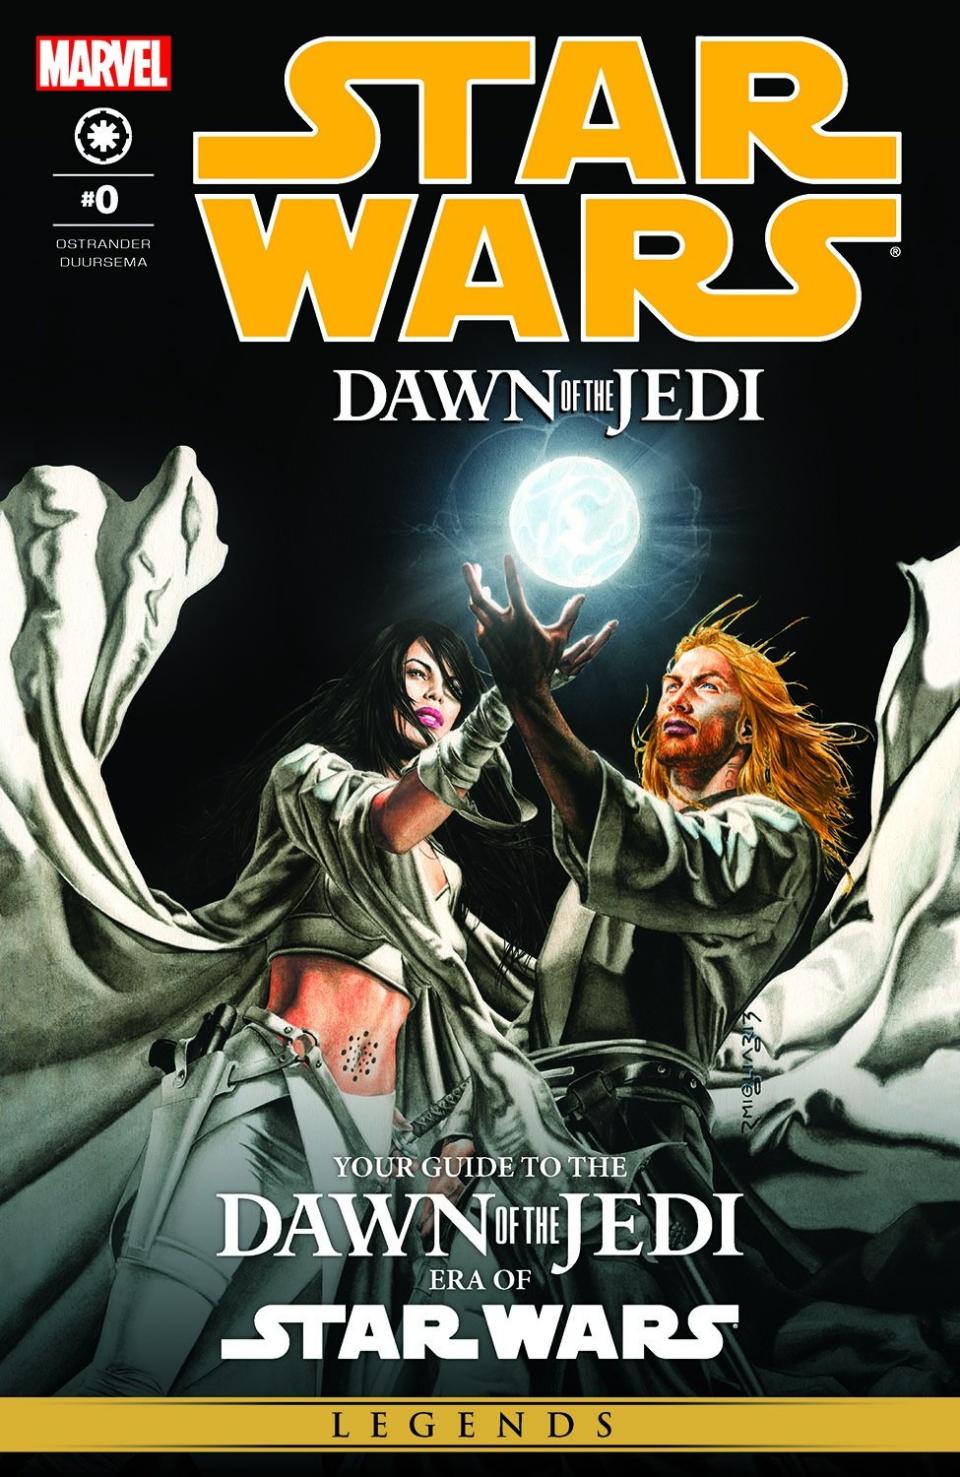 Cover of Tales of the Jedi #0 features two characters reaching for a glowing orb.